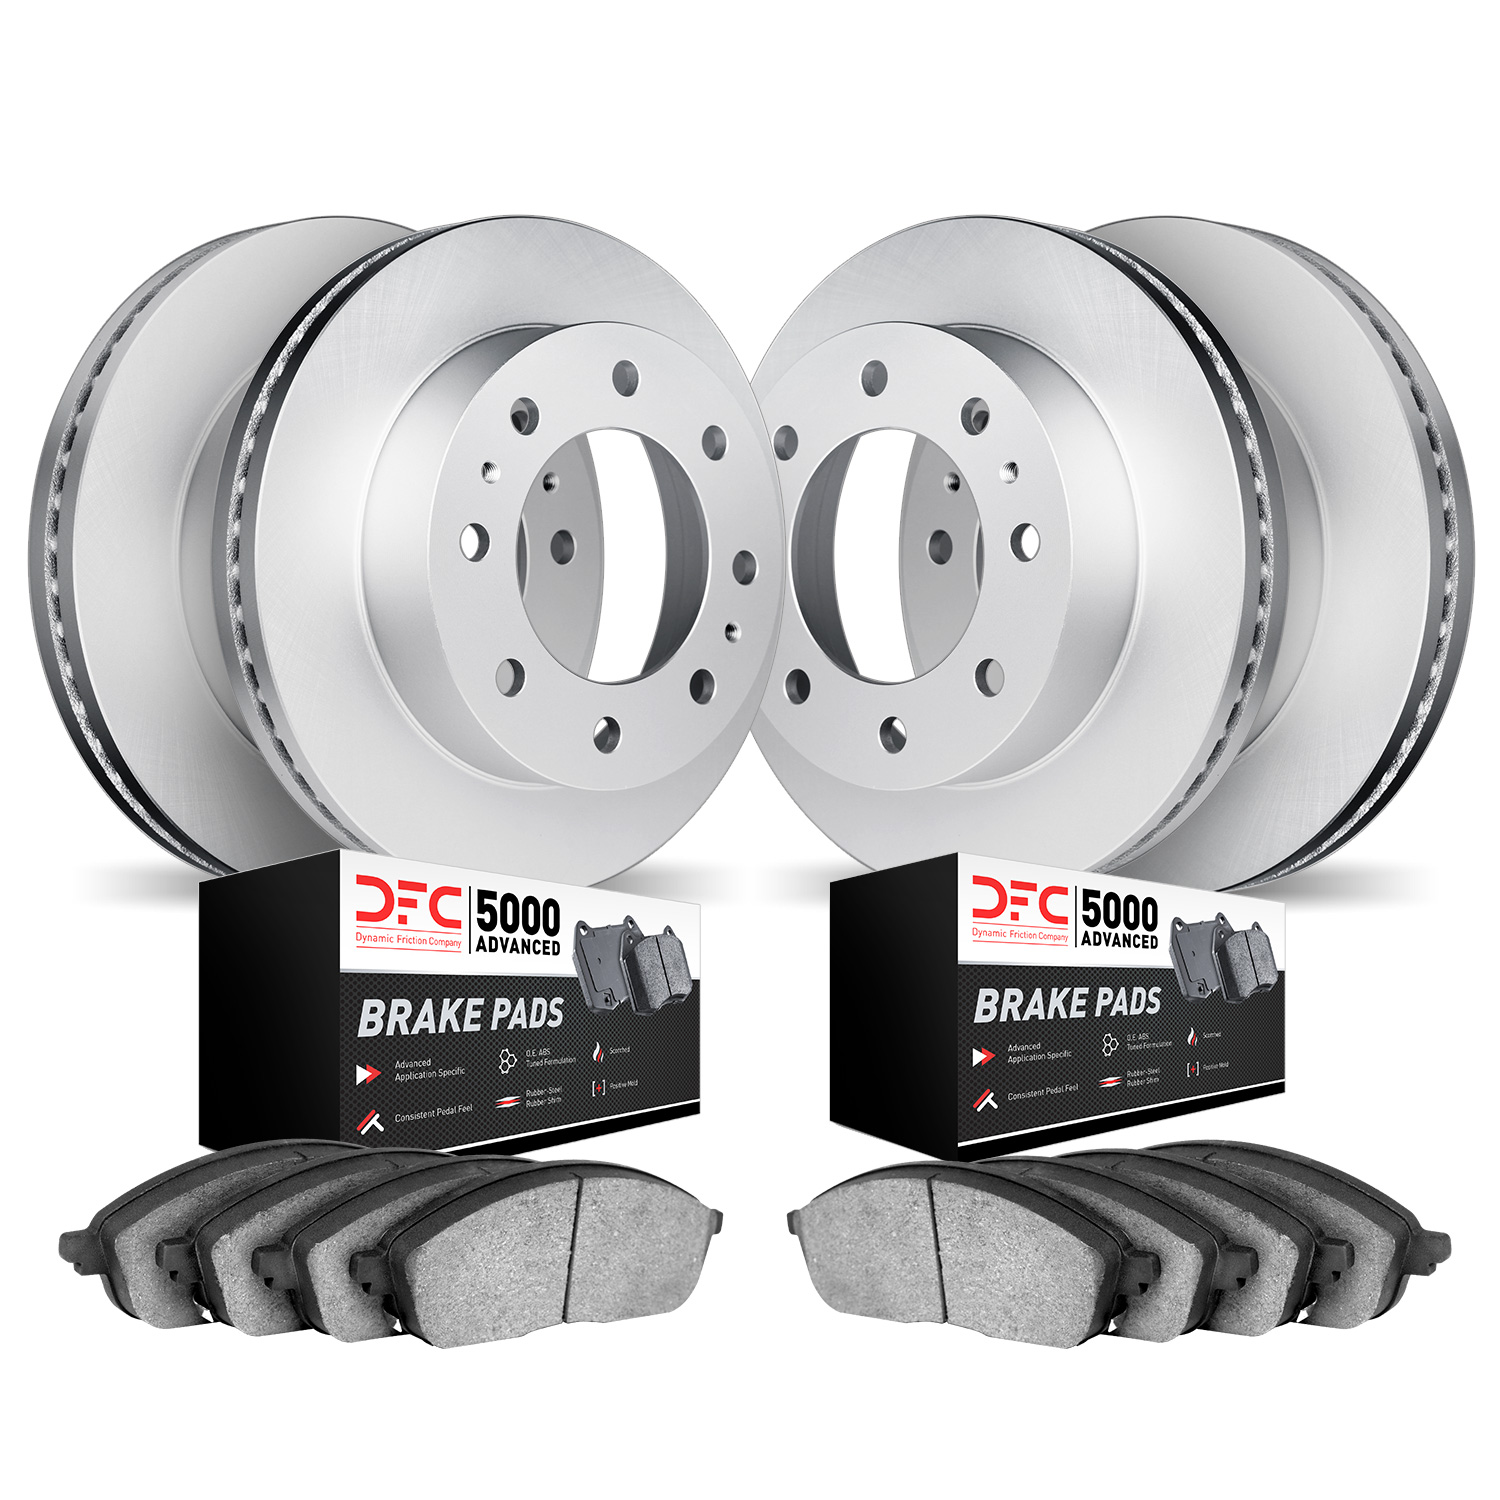 4504-54093 Geospec Brake Rotors w/5000 Advanced Brake Pads Kit, Fits Select Ford/Lincoln/Mercury/Mazda, Position: Front and Rear